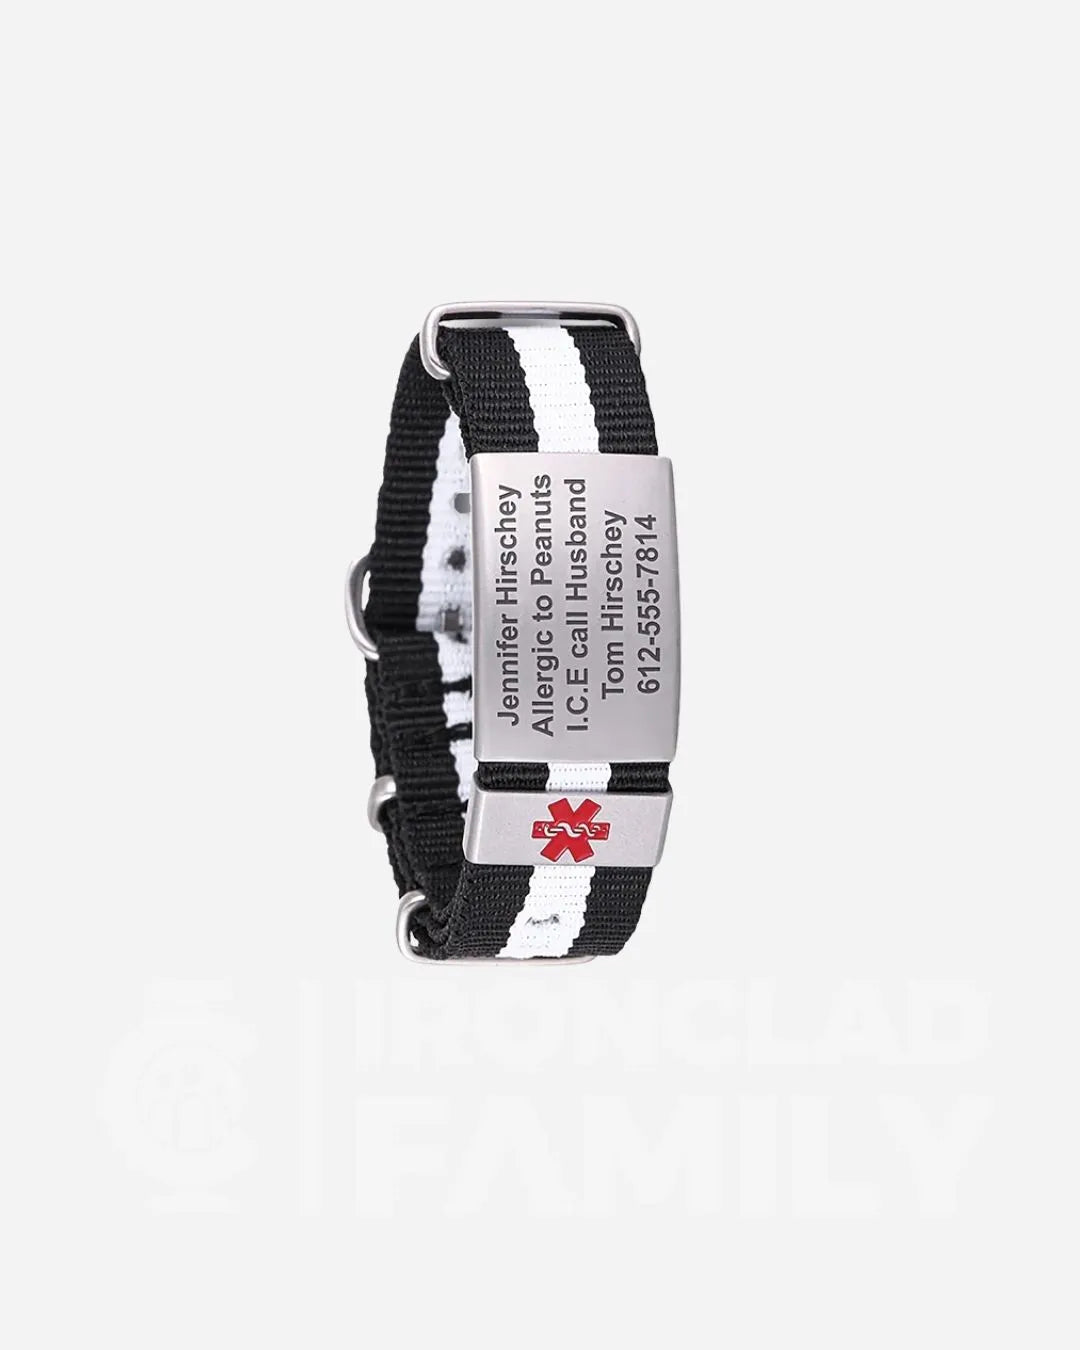 Black and white medical ID bracelet with a red cross, made from fabric and stainless steel